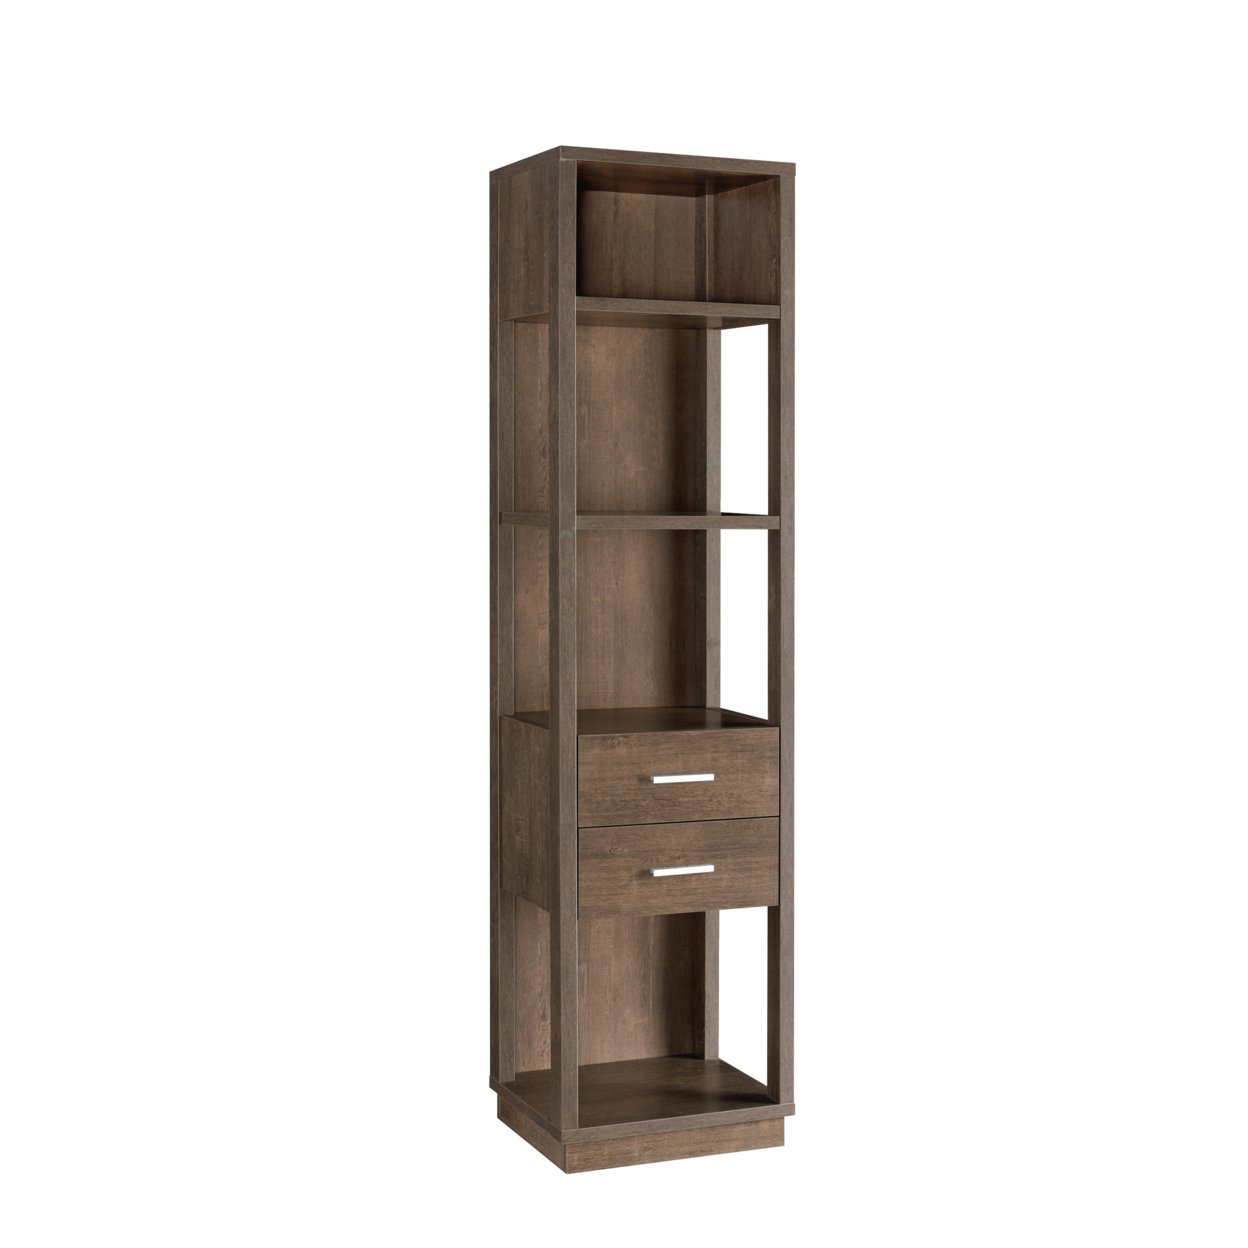 Transitional Wooden Pier With 4 Open Shelves And 2 Drawers, Brown- Saltoro Sherpi